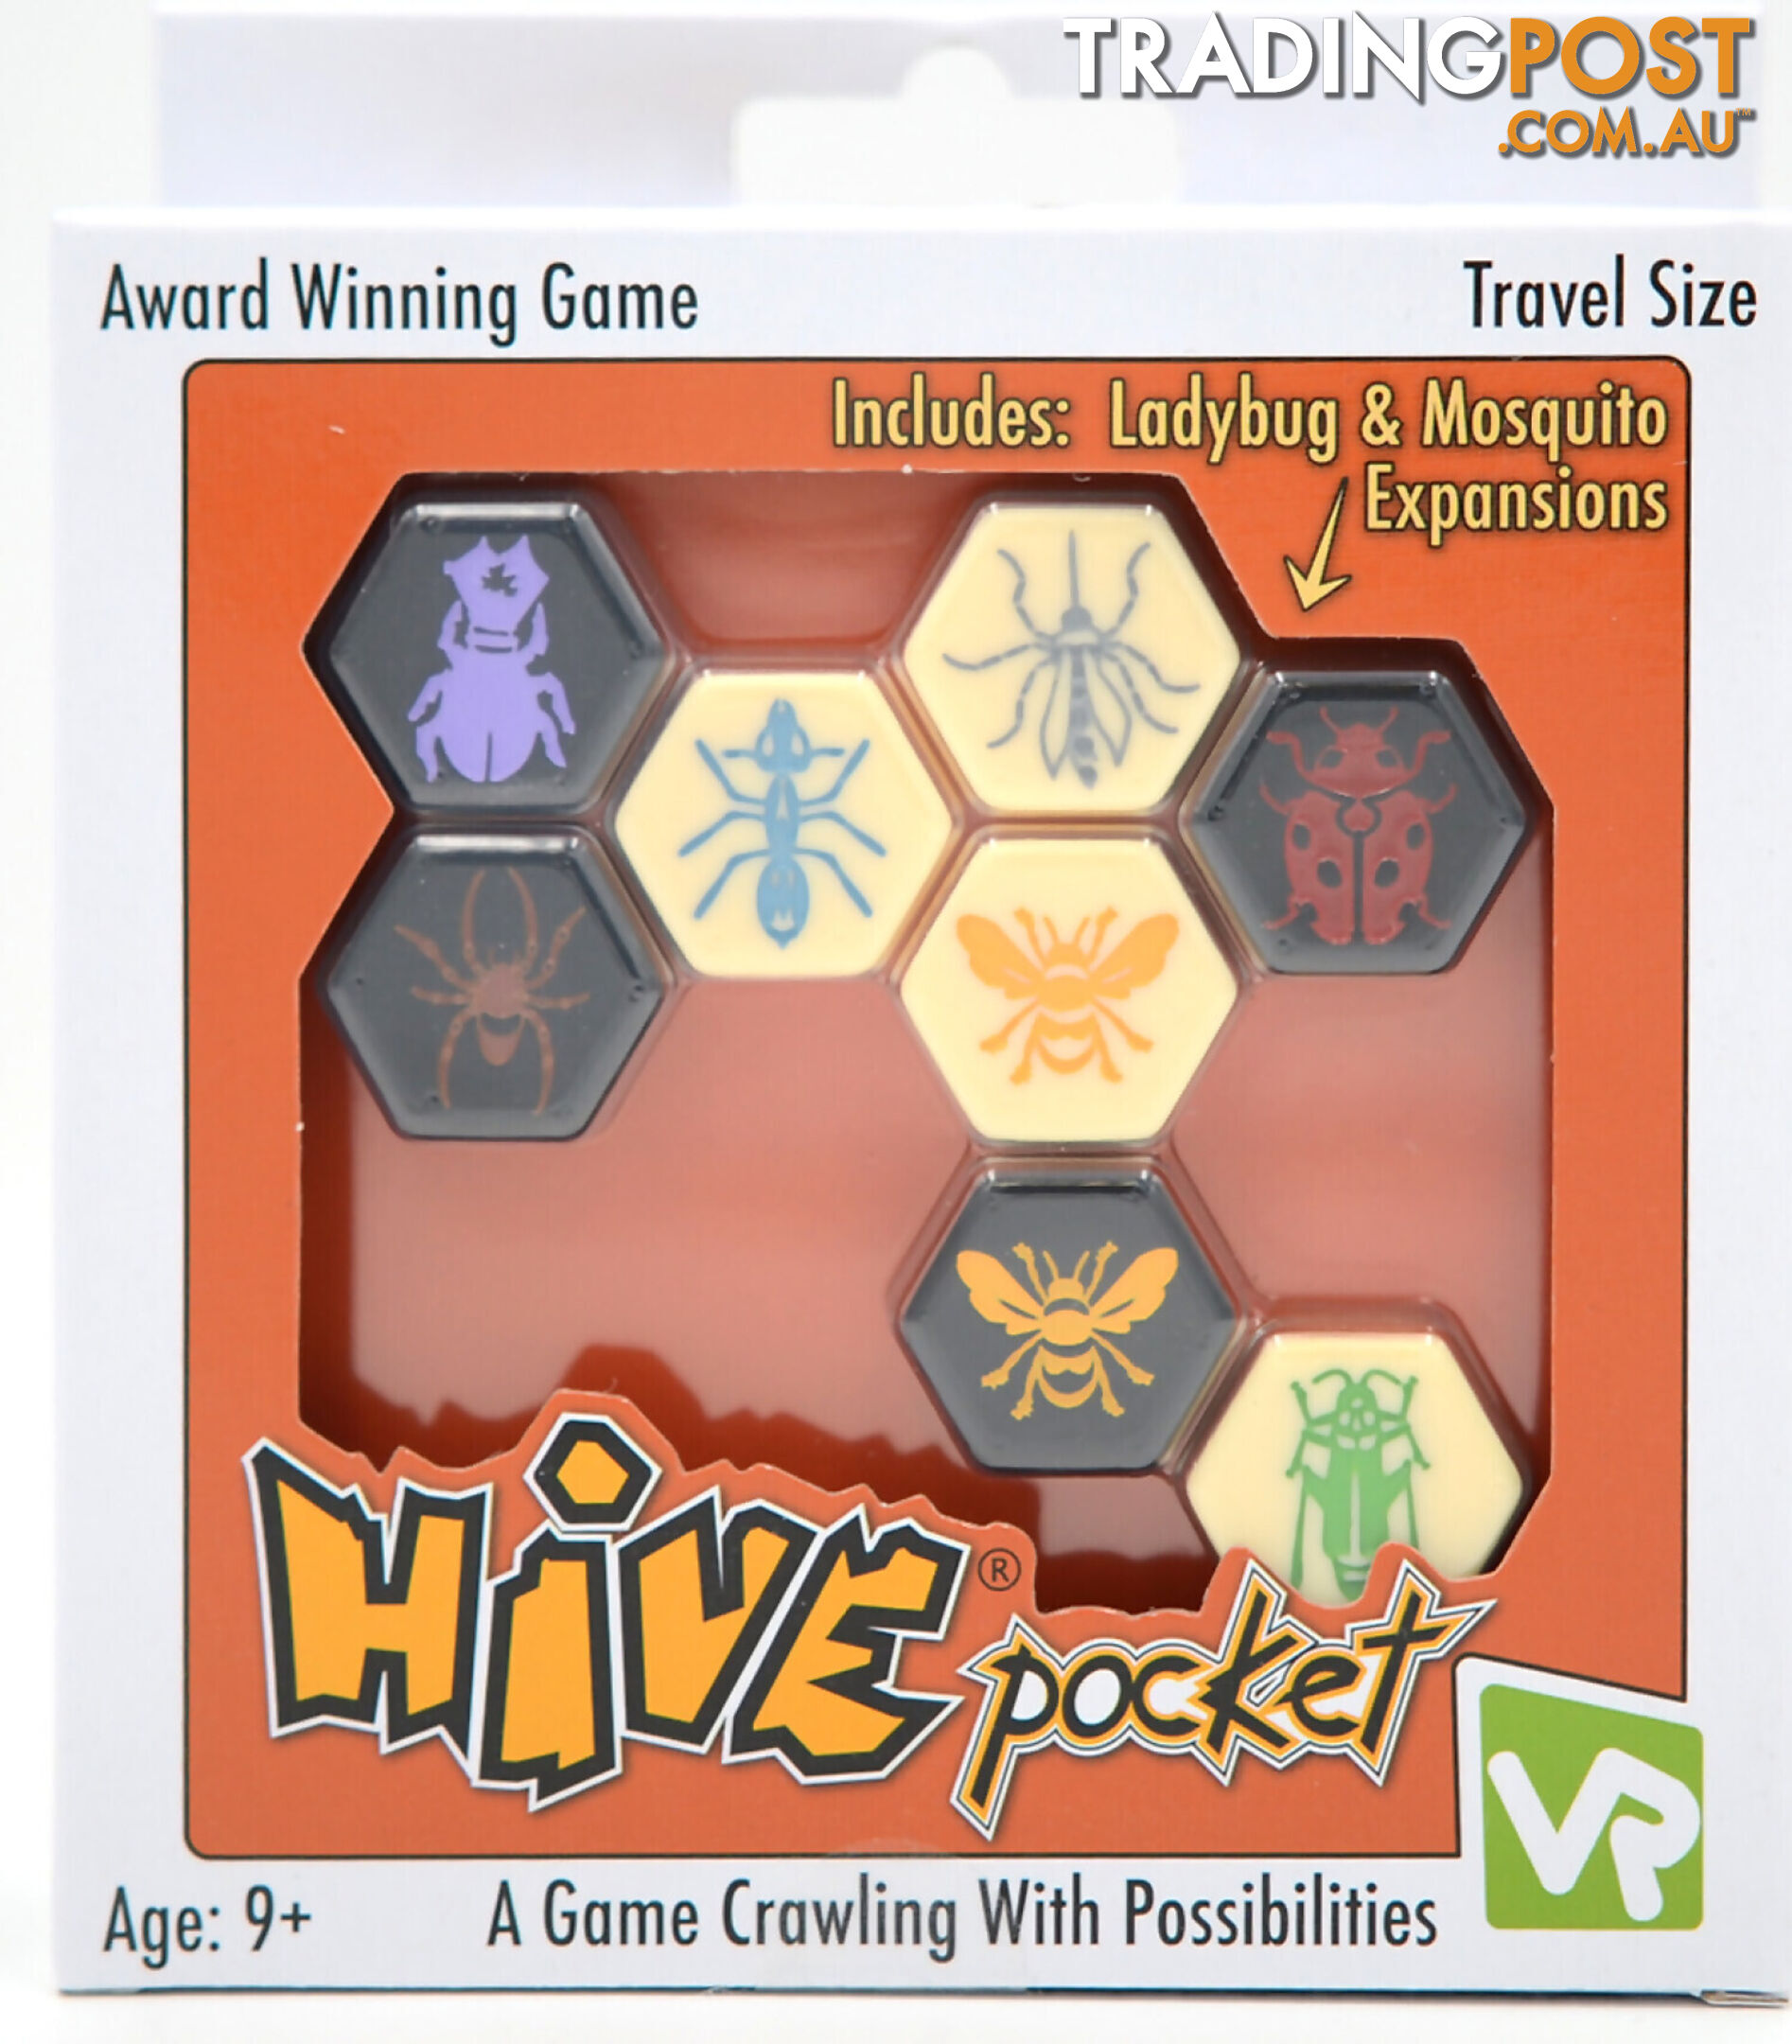 Hive Pocket Abstract Strategy Game By Gen42 - Vr73621101923 - 736211019233